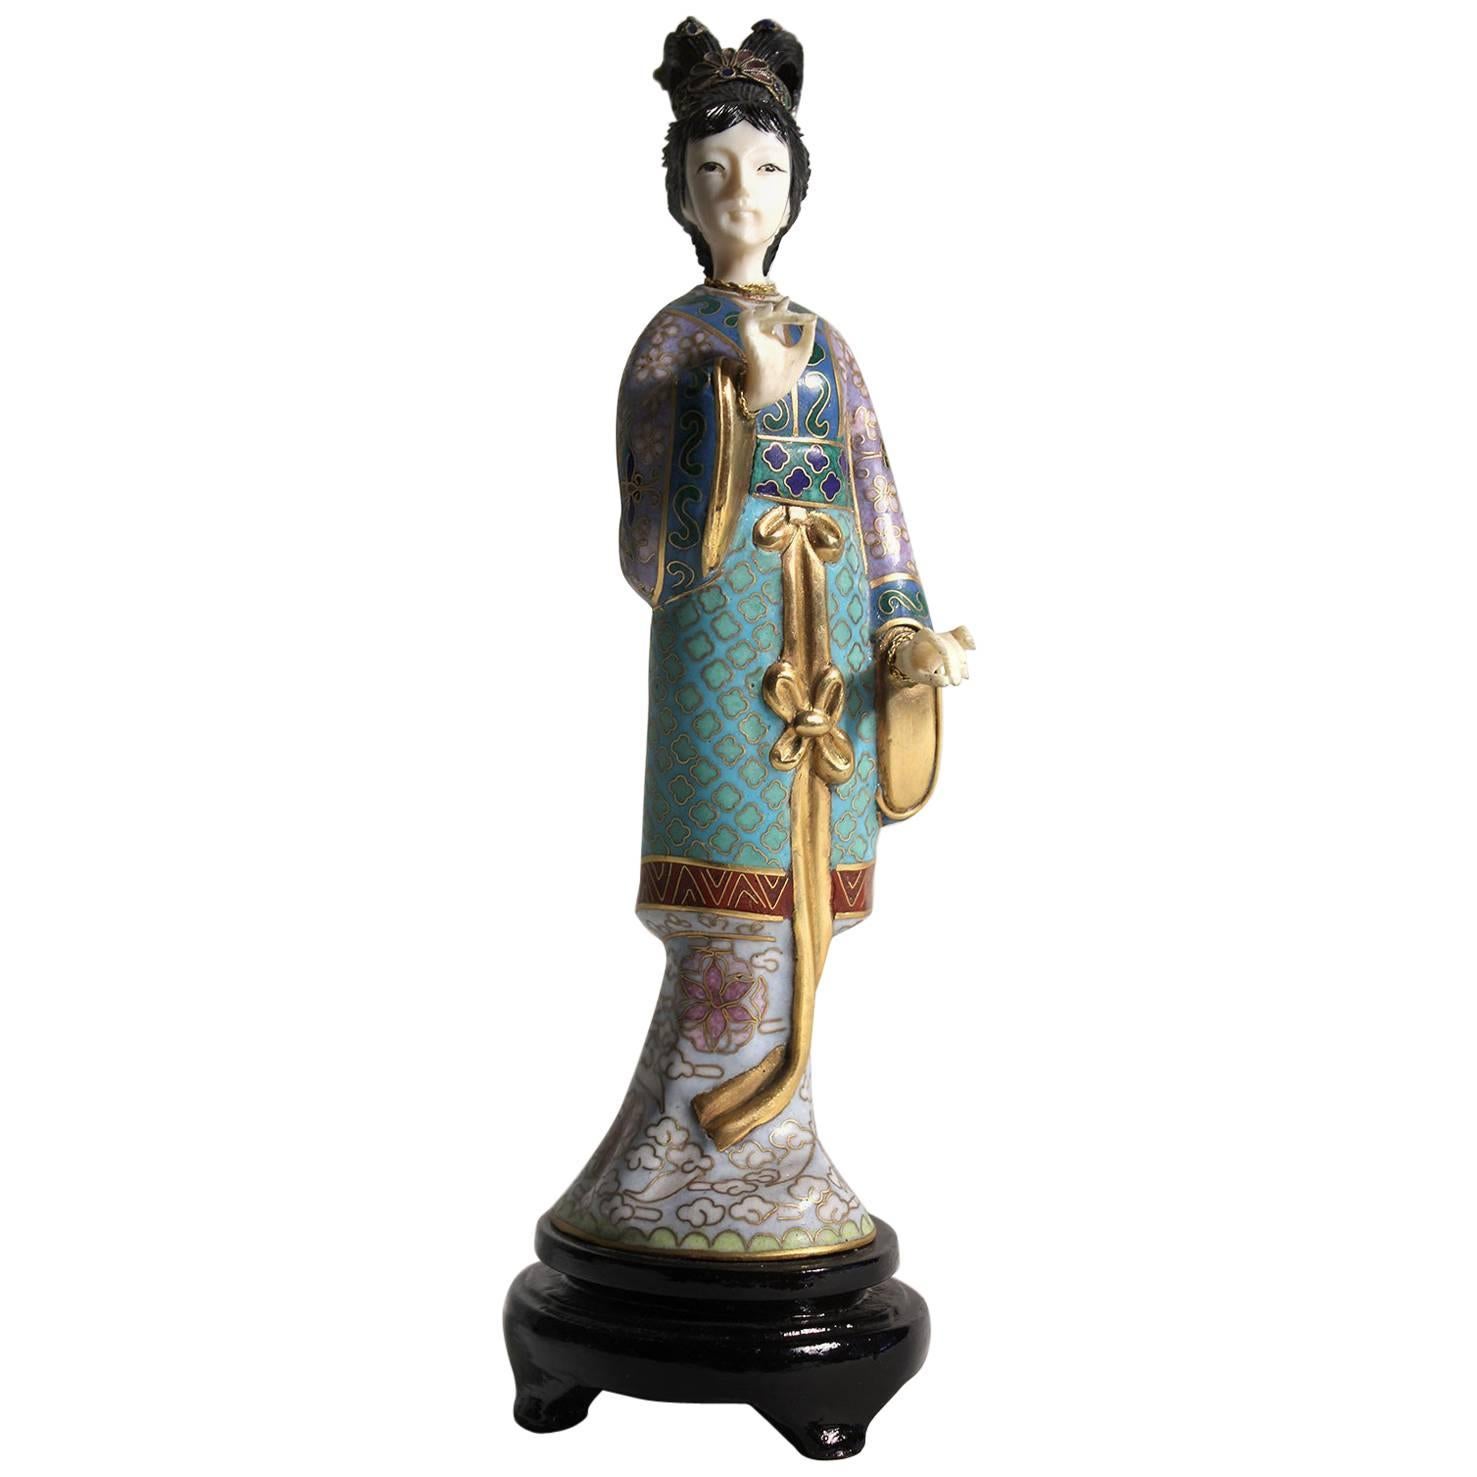 Antique Chinese Cloisonne Enameled Carved Guanyin Quan Yin Sculpture Figurine